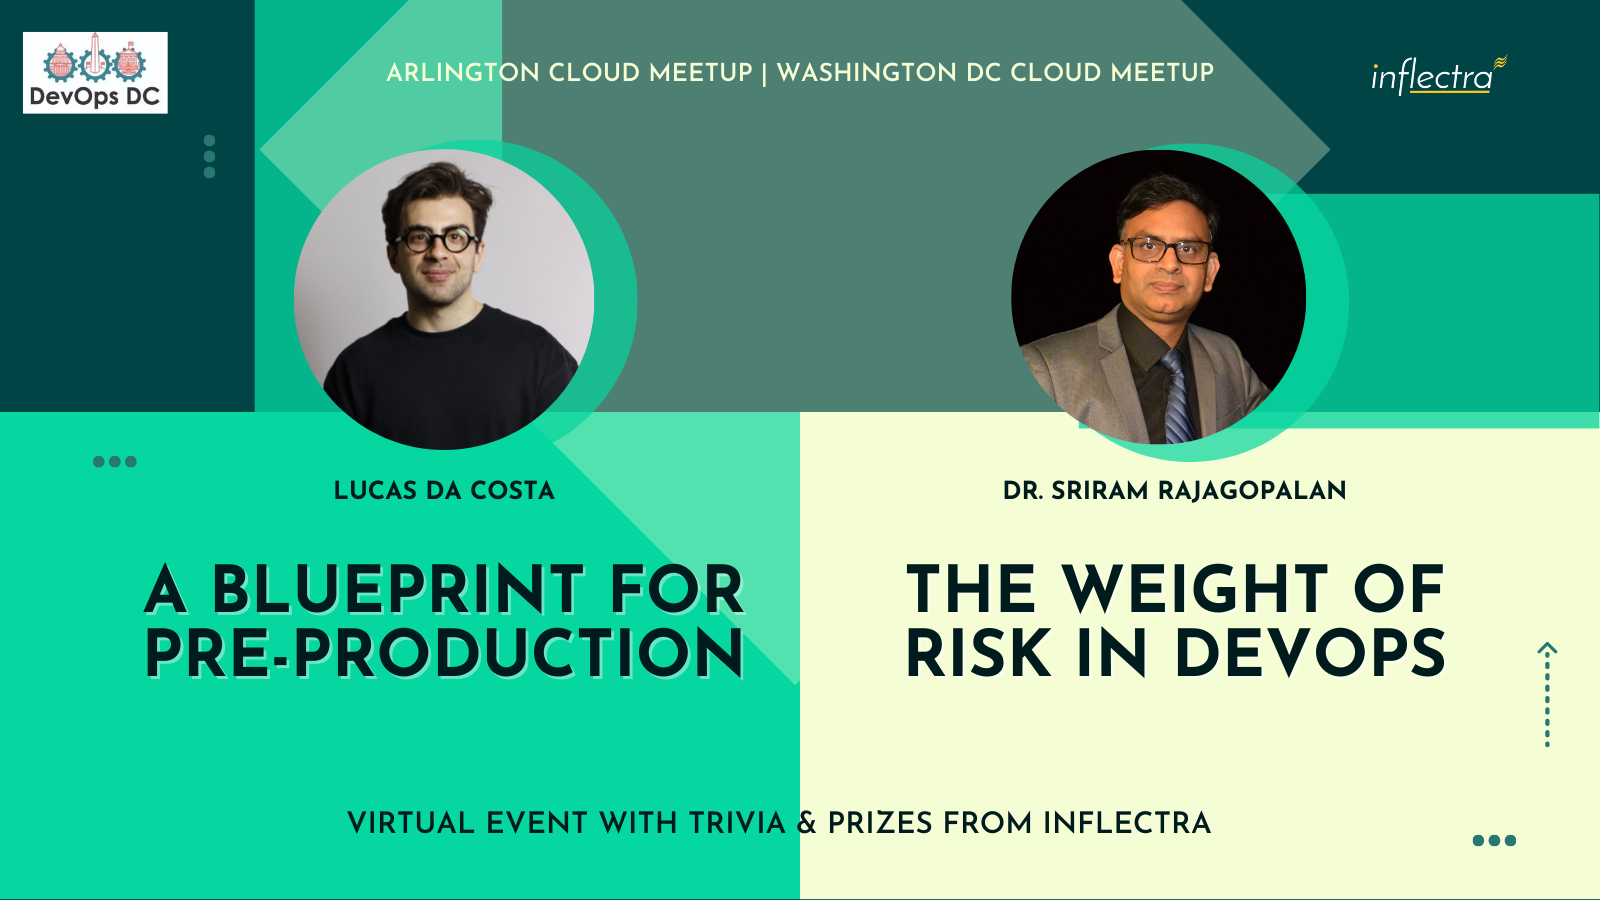 devops-dc-inflectra-meetup-a-blueprint-for-pre-production-and-the-weight-of-risk-in-devops-image